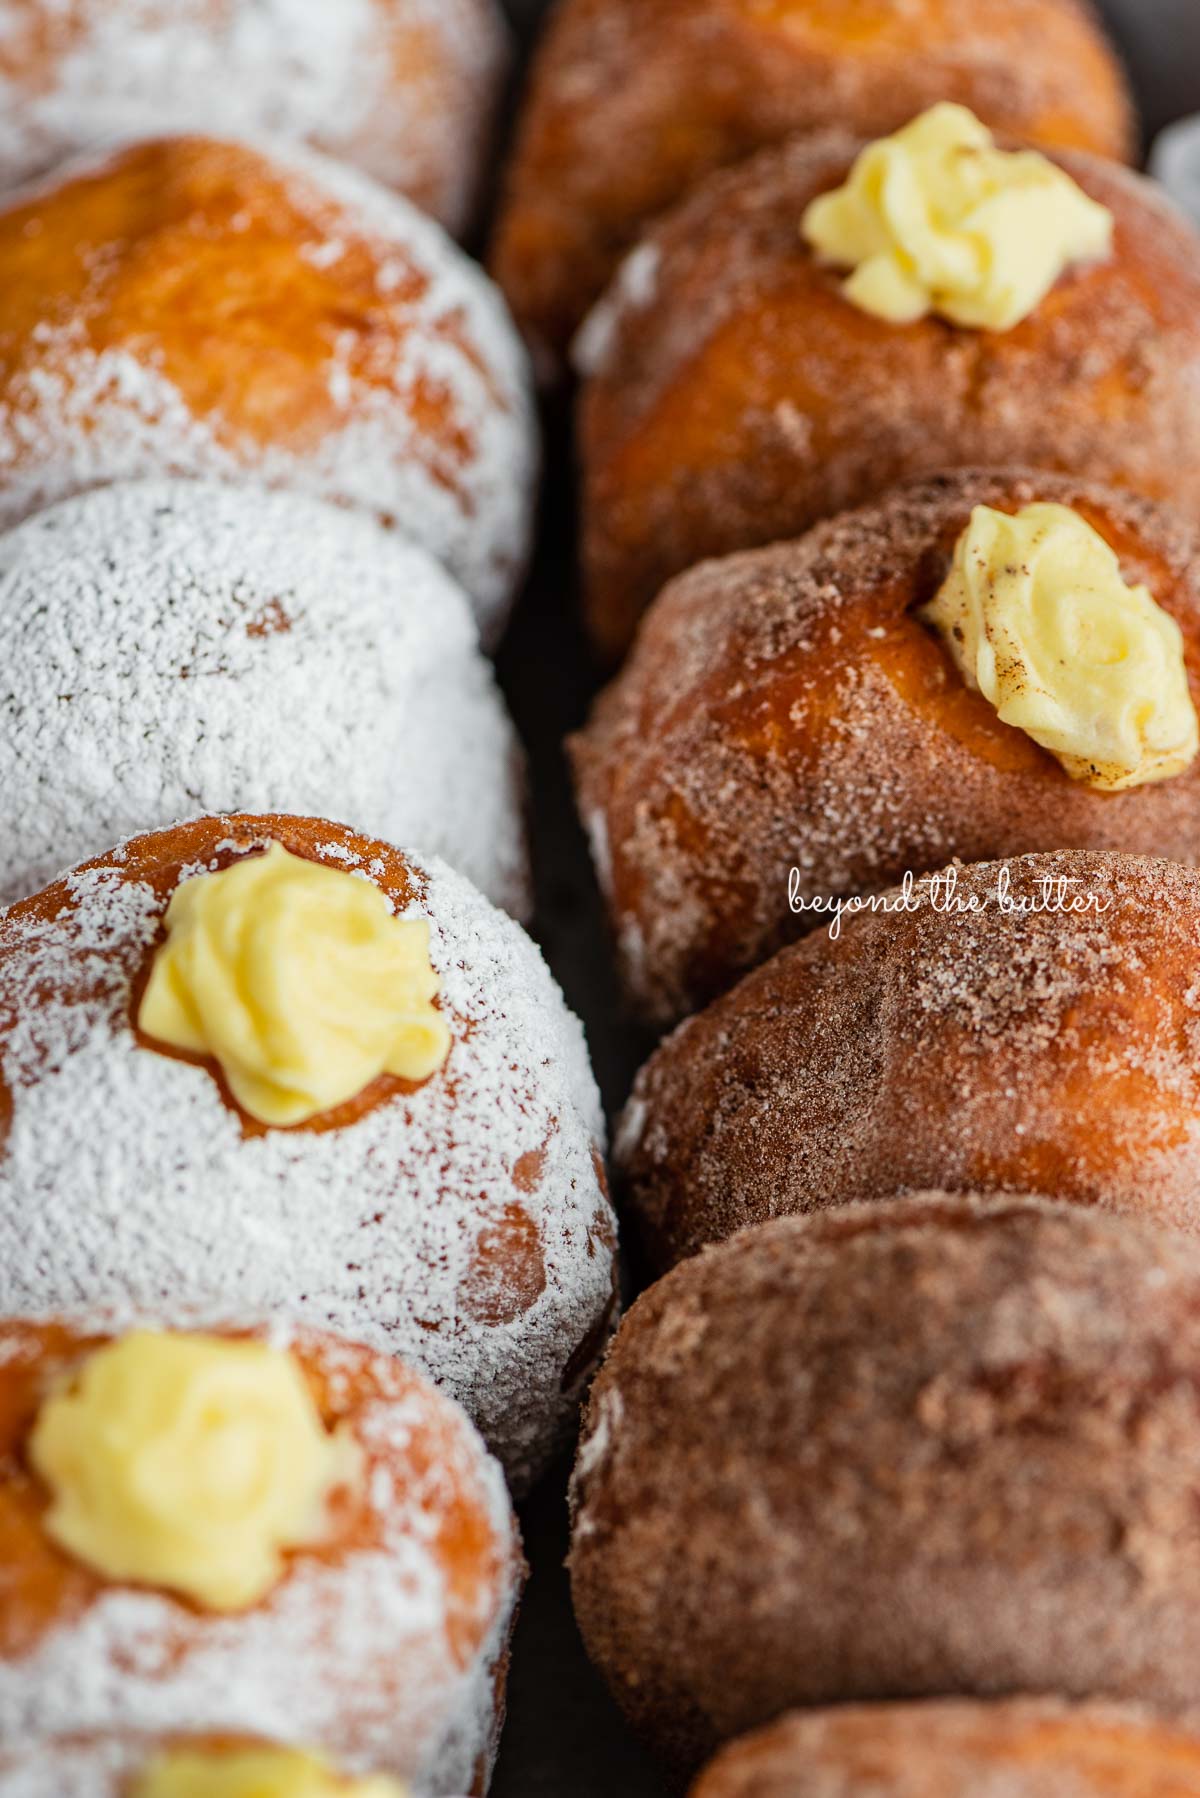 Homemade Pennsylvania dutch fasnacht doughnuts filled with pastry cream | © Beyond the Butter®